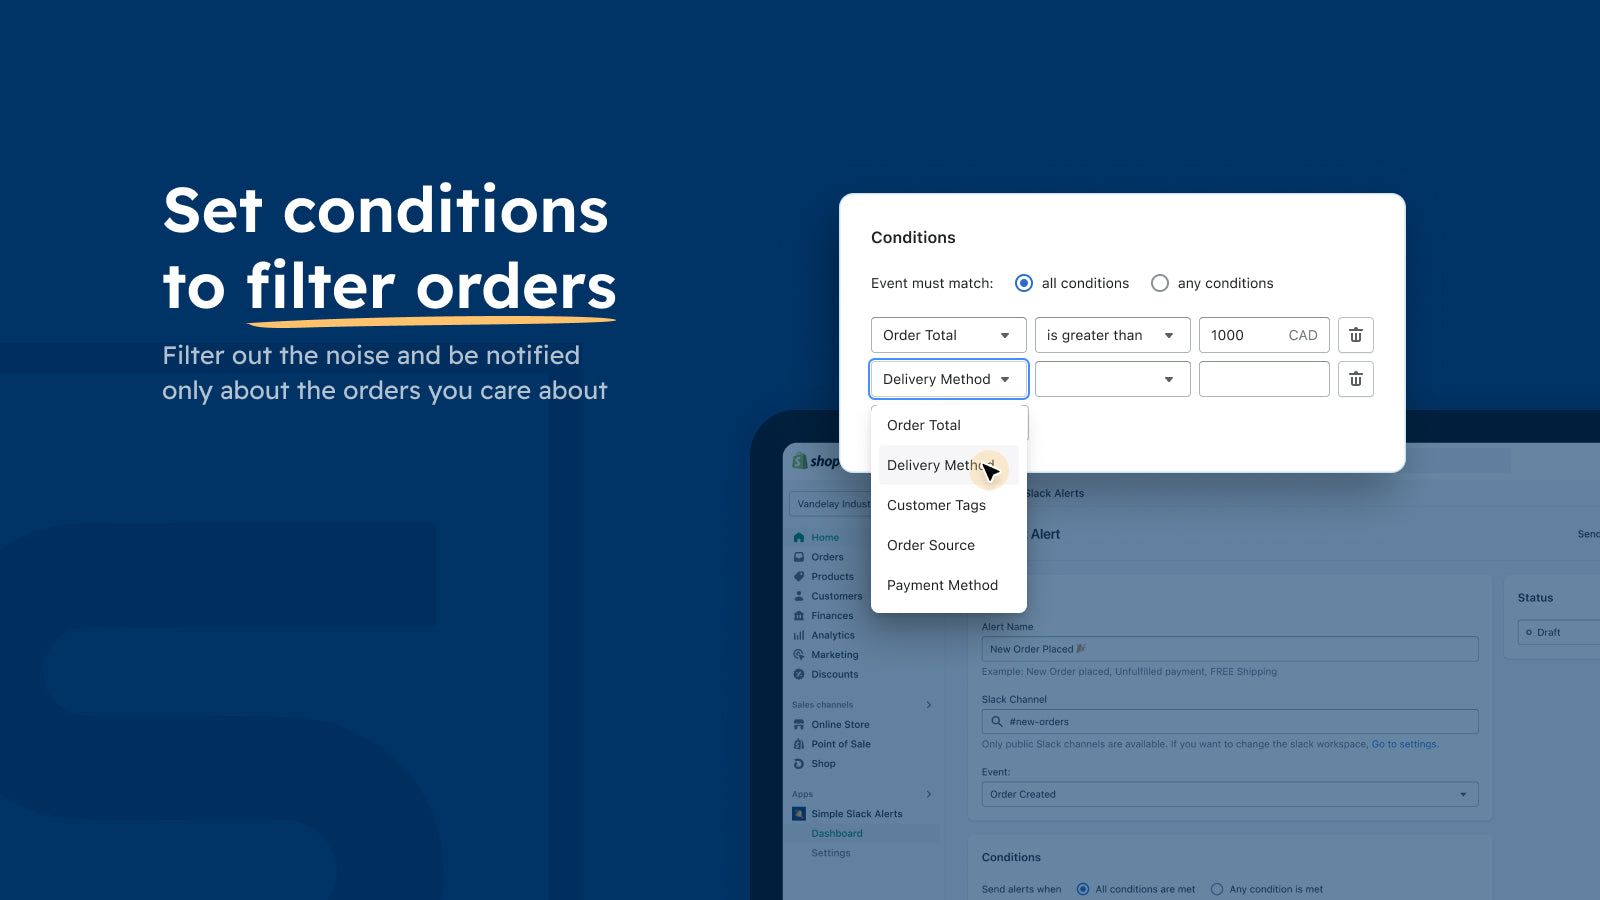 Set conditions of orders you care about